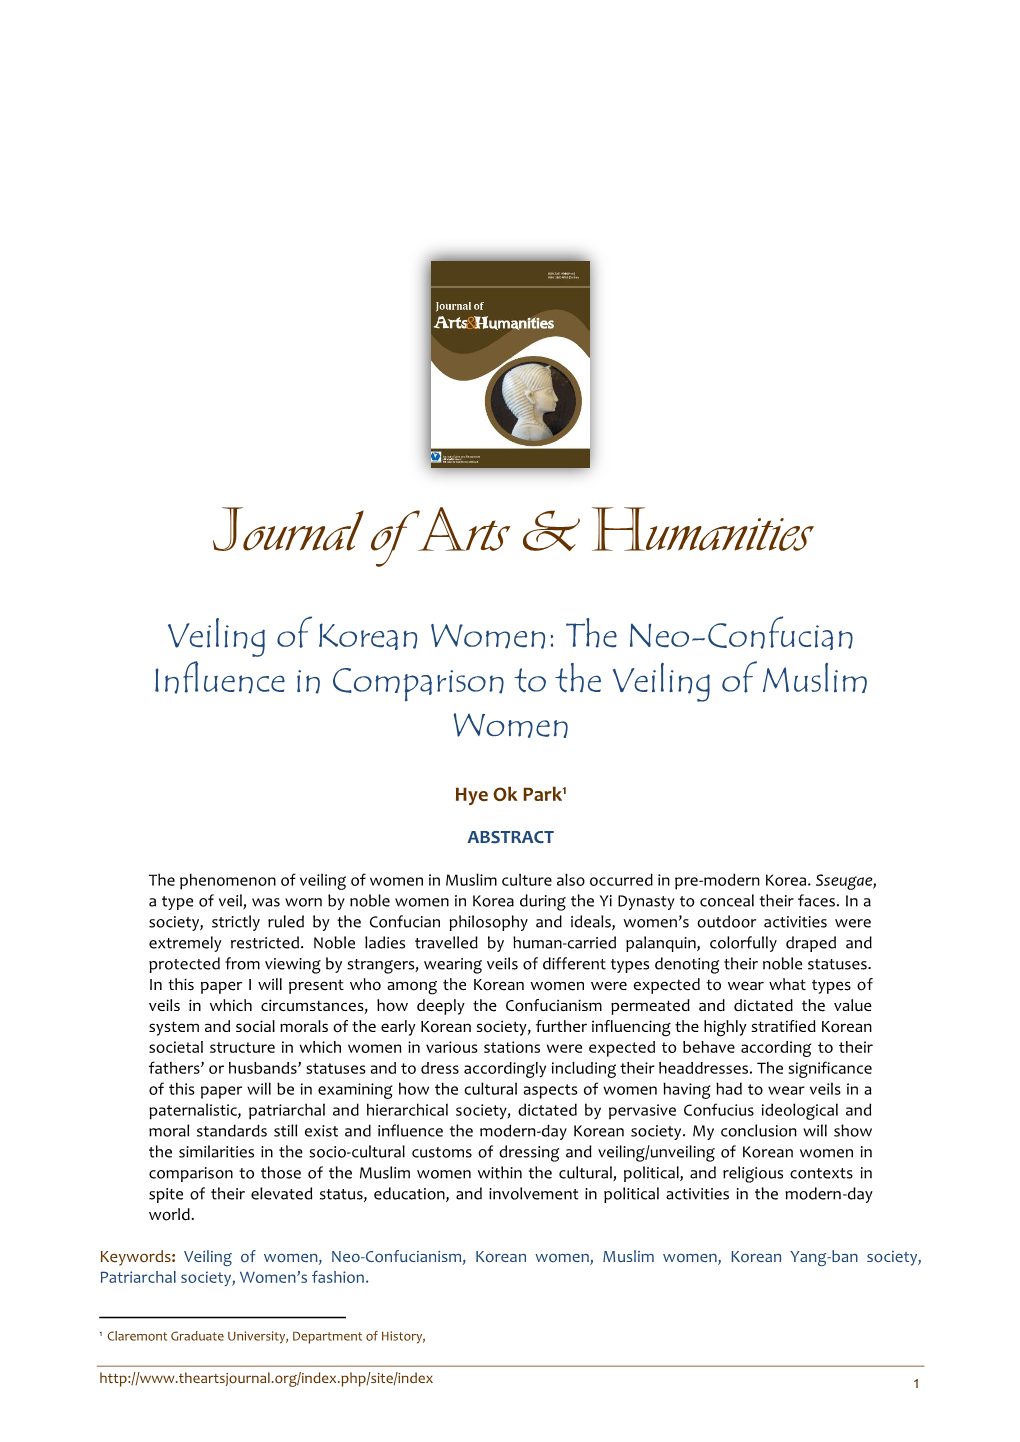 Veiling of Korean Women: the Neo-Confucian Influence in Comparison to the Veiling of Muslim Women